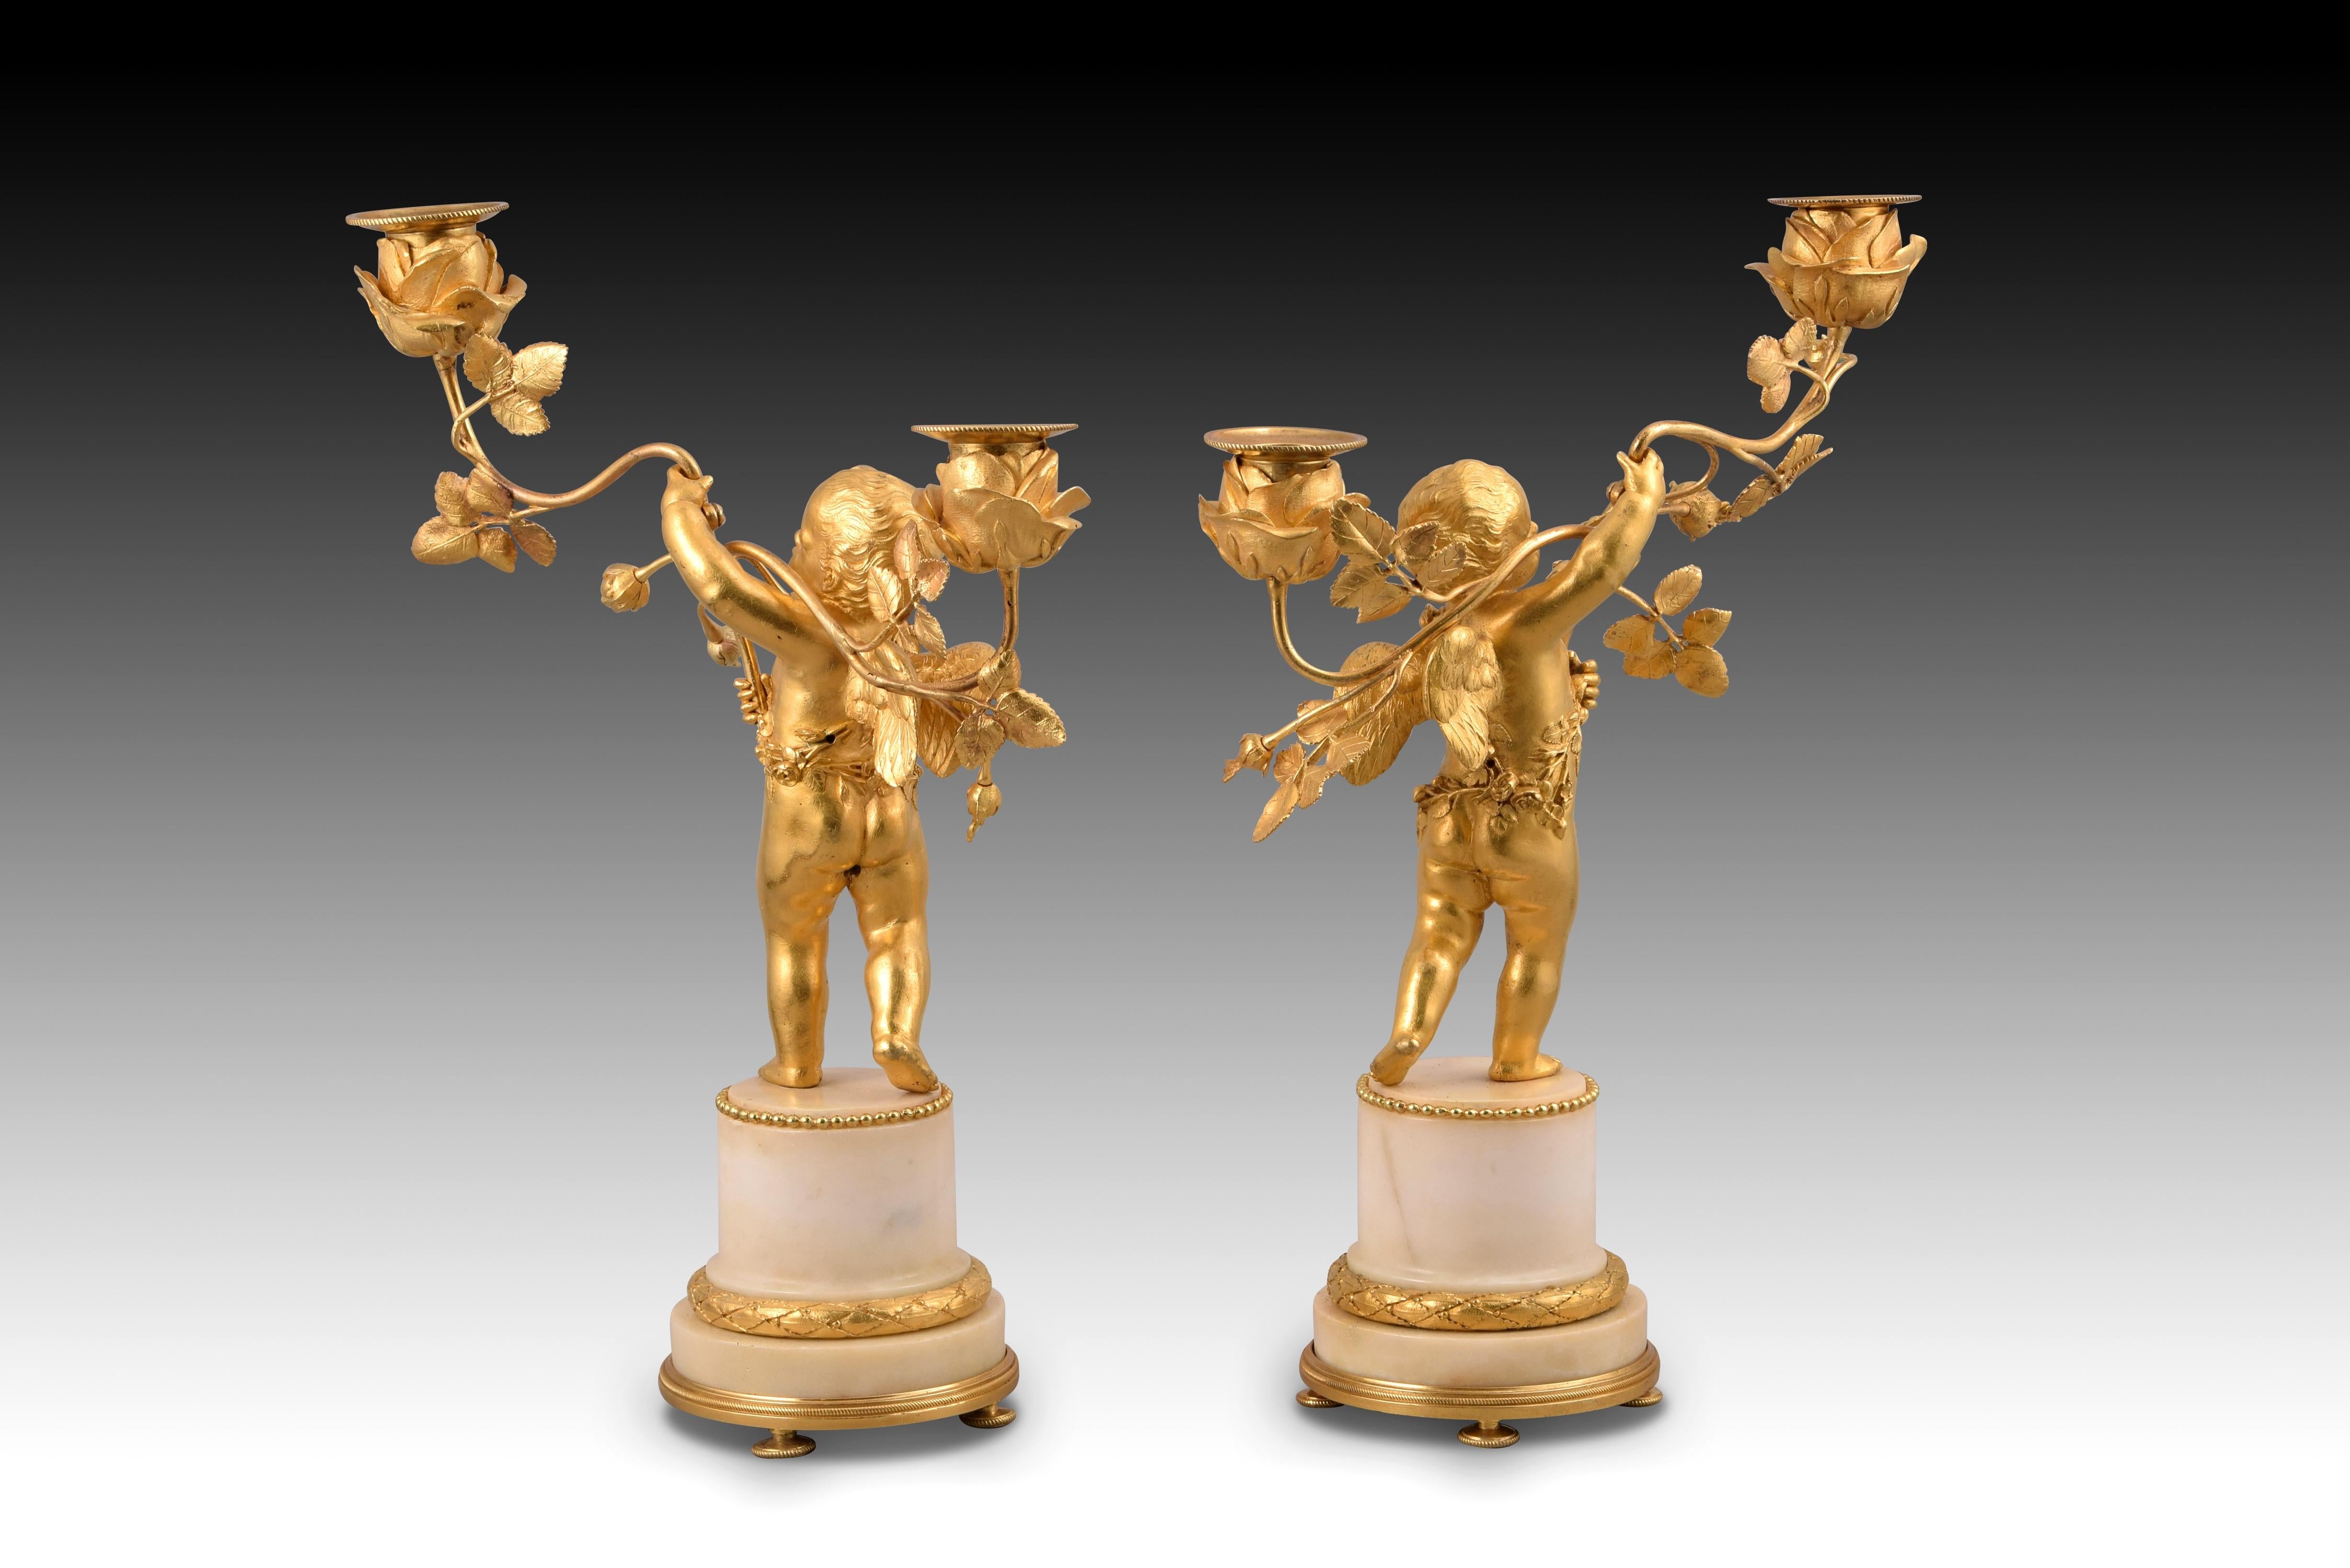 French Pair of Napoleon III Candlesticks or Candelabra, Bronze, Marble, 19th Century